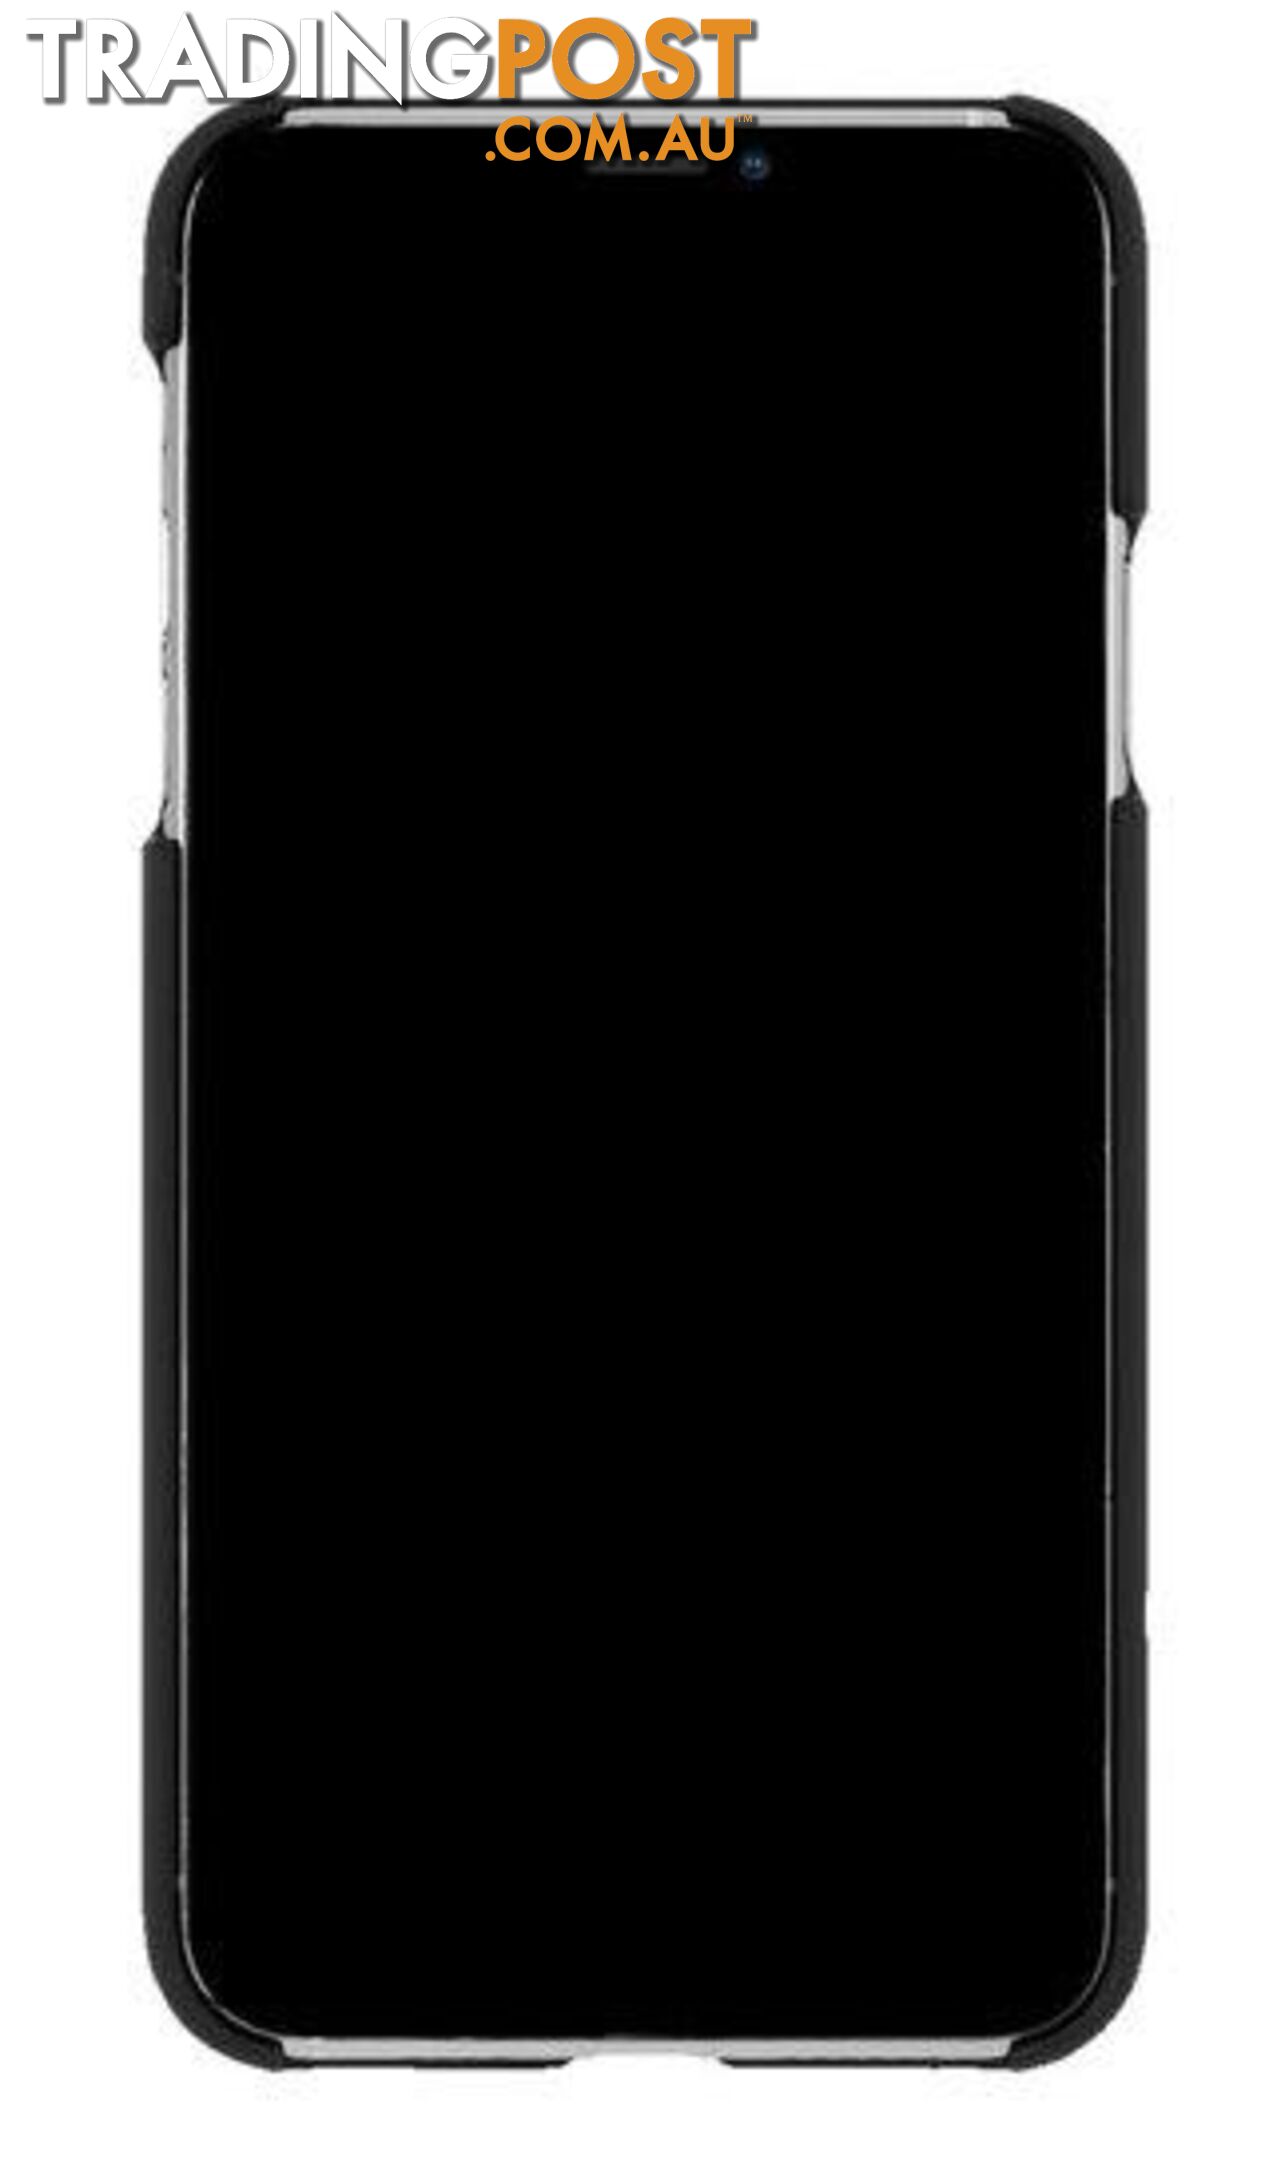 Case-Mate Barely There Case For iPhone 11 Pro - Case-Mate - Clear - 846127187589